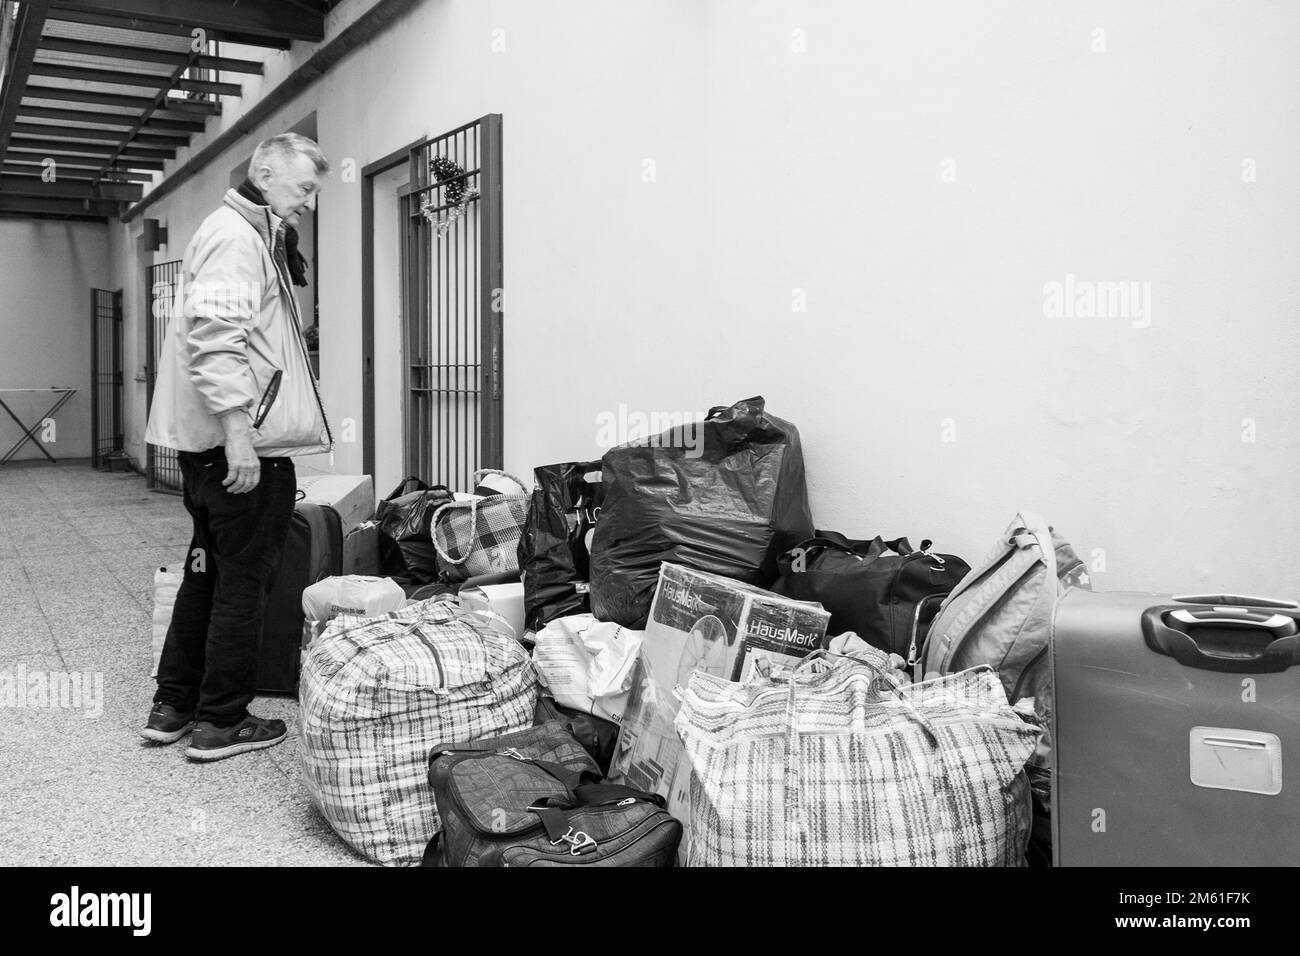 Italy, Abbiategrasso, Ukrainian refugees in the reception center of the former convent of the Annunciata Stock Photo